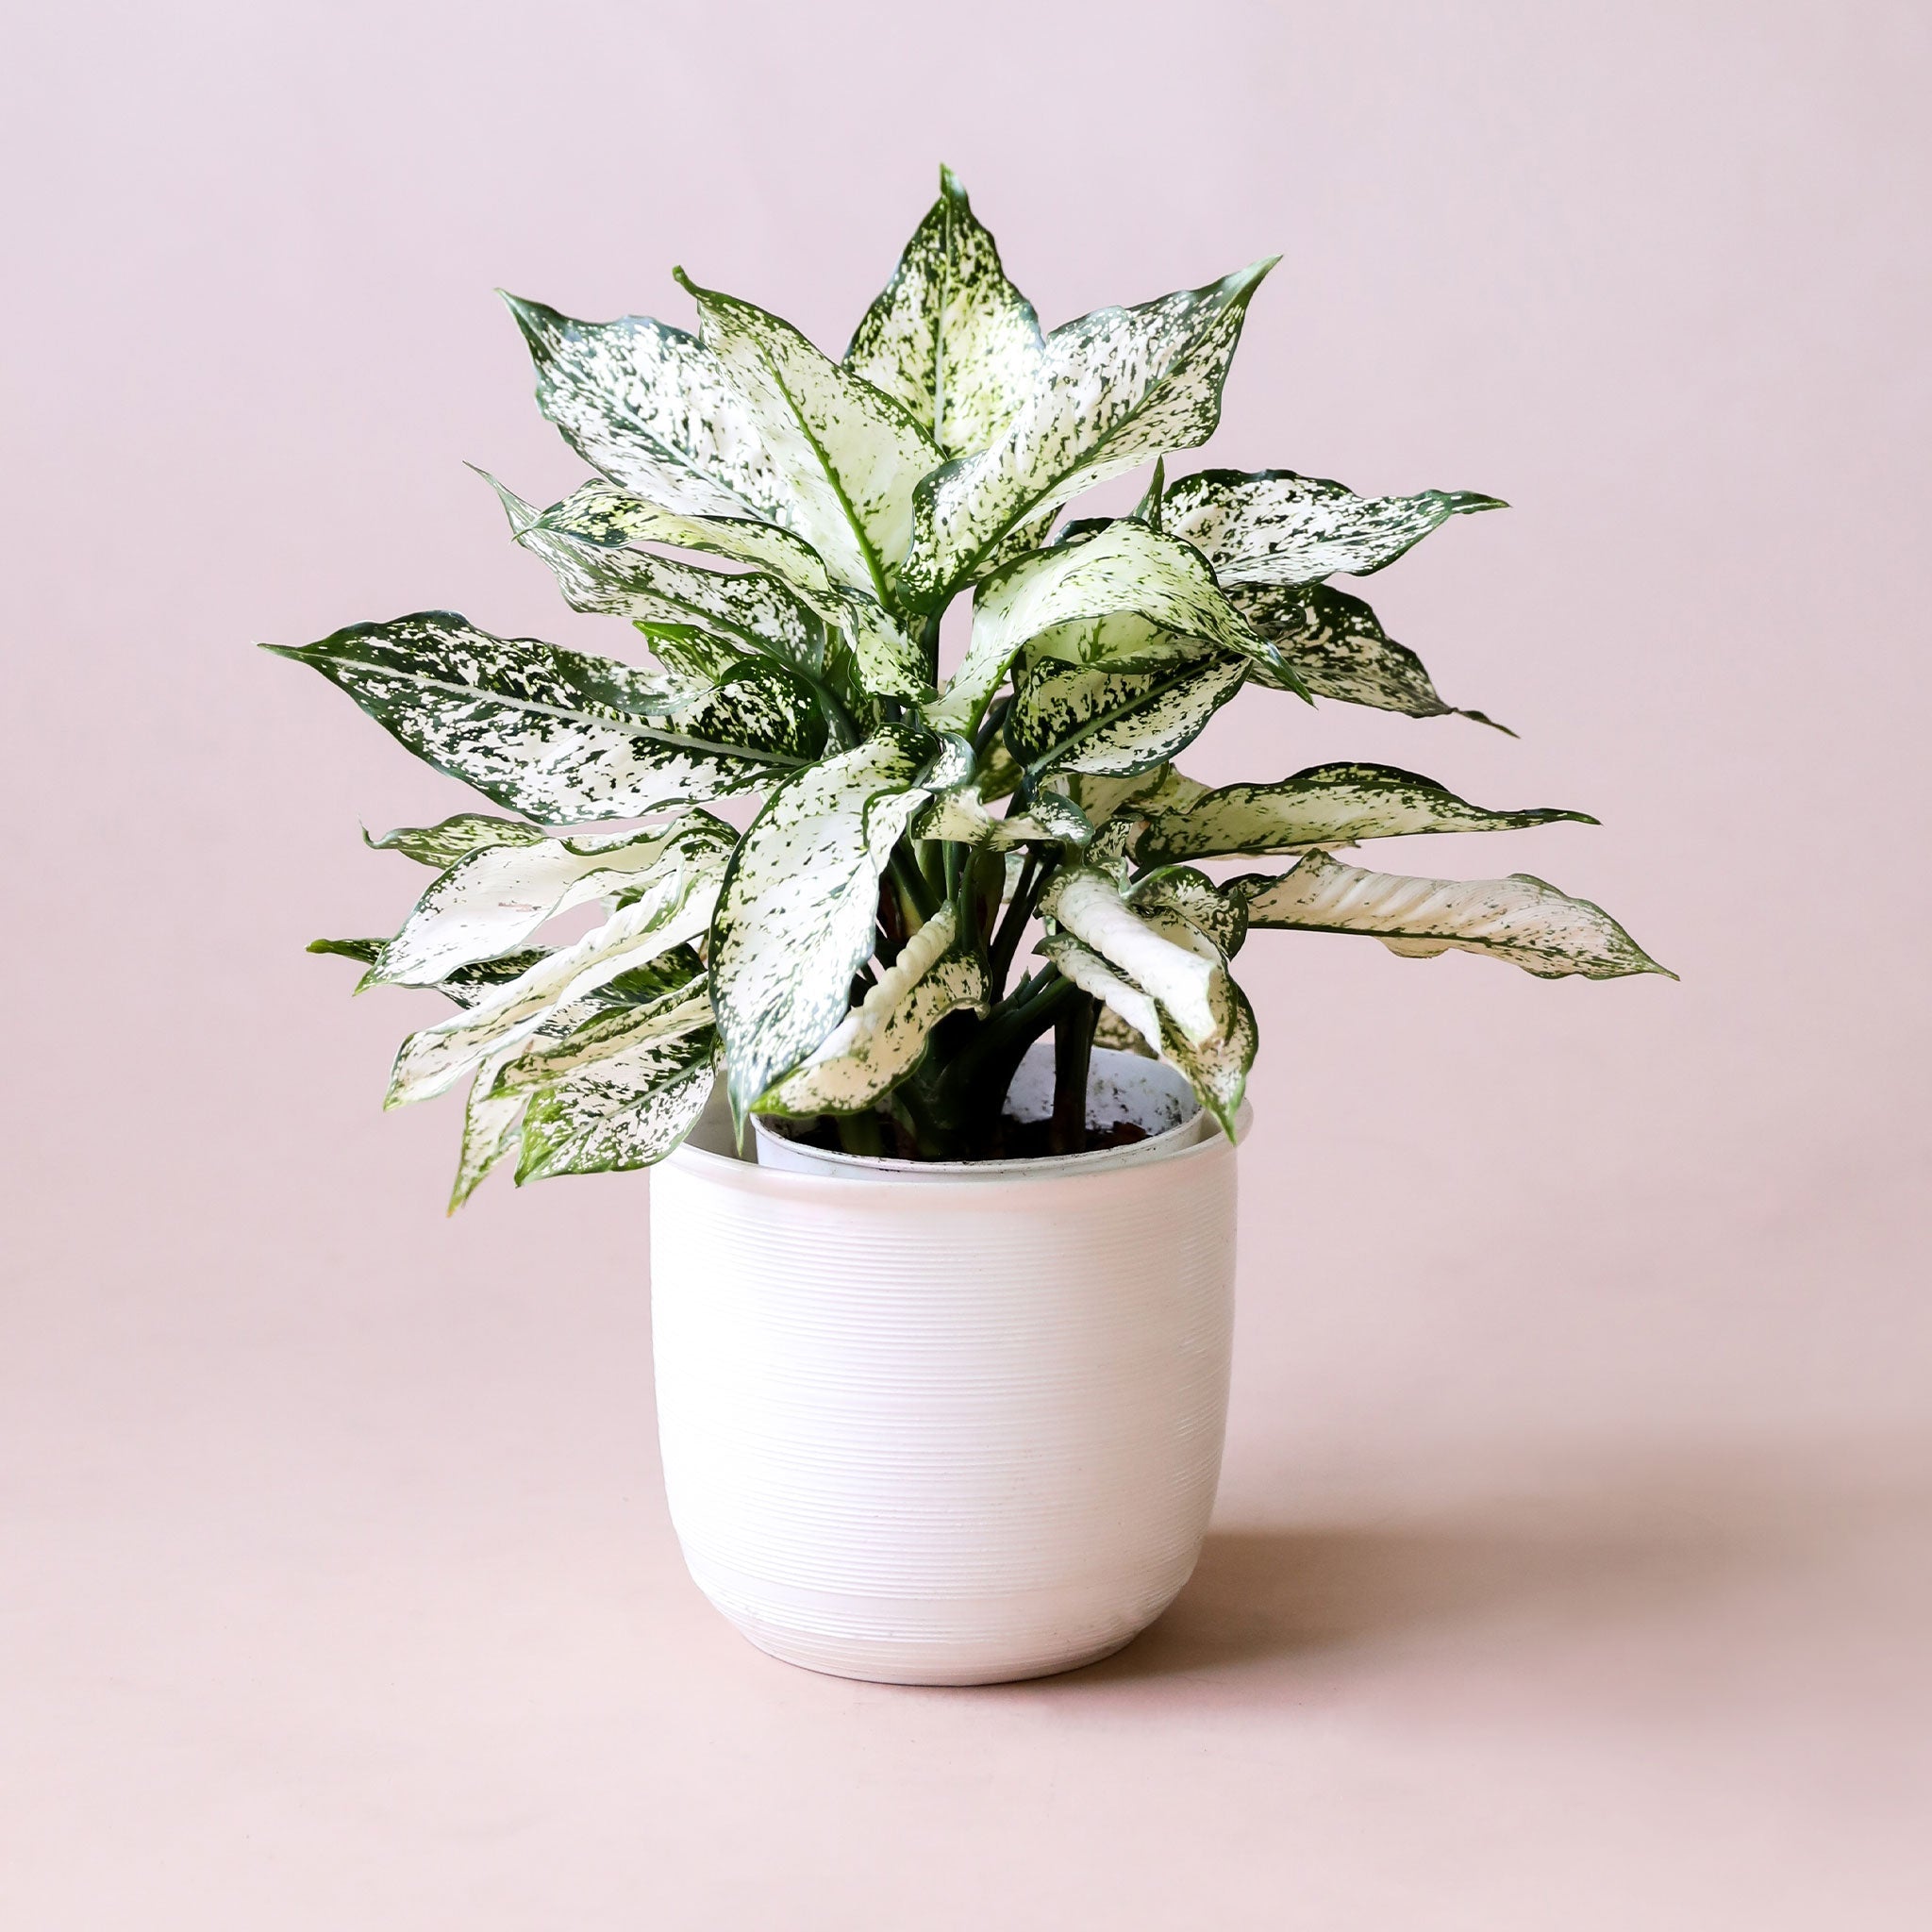 An Aglaonema First Diamond plant in a white pot. It has many spear shaped leaves speckled with light and dark green colors.